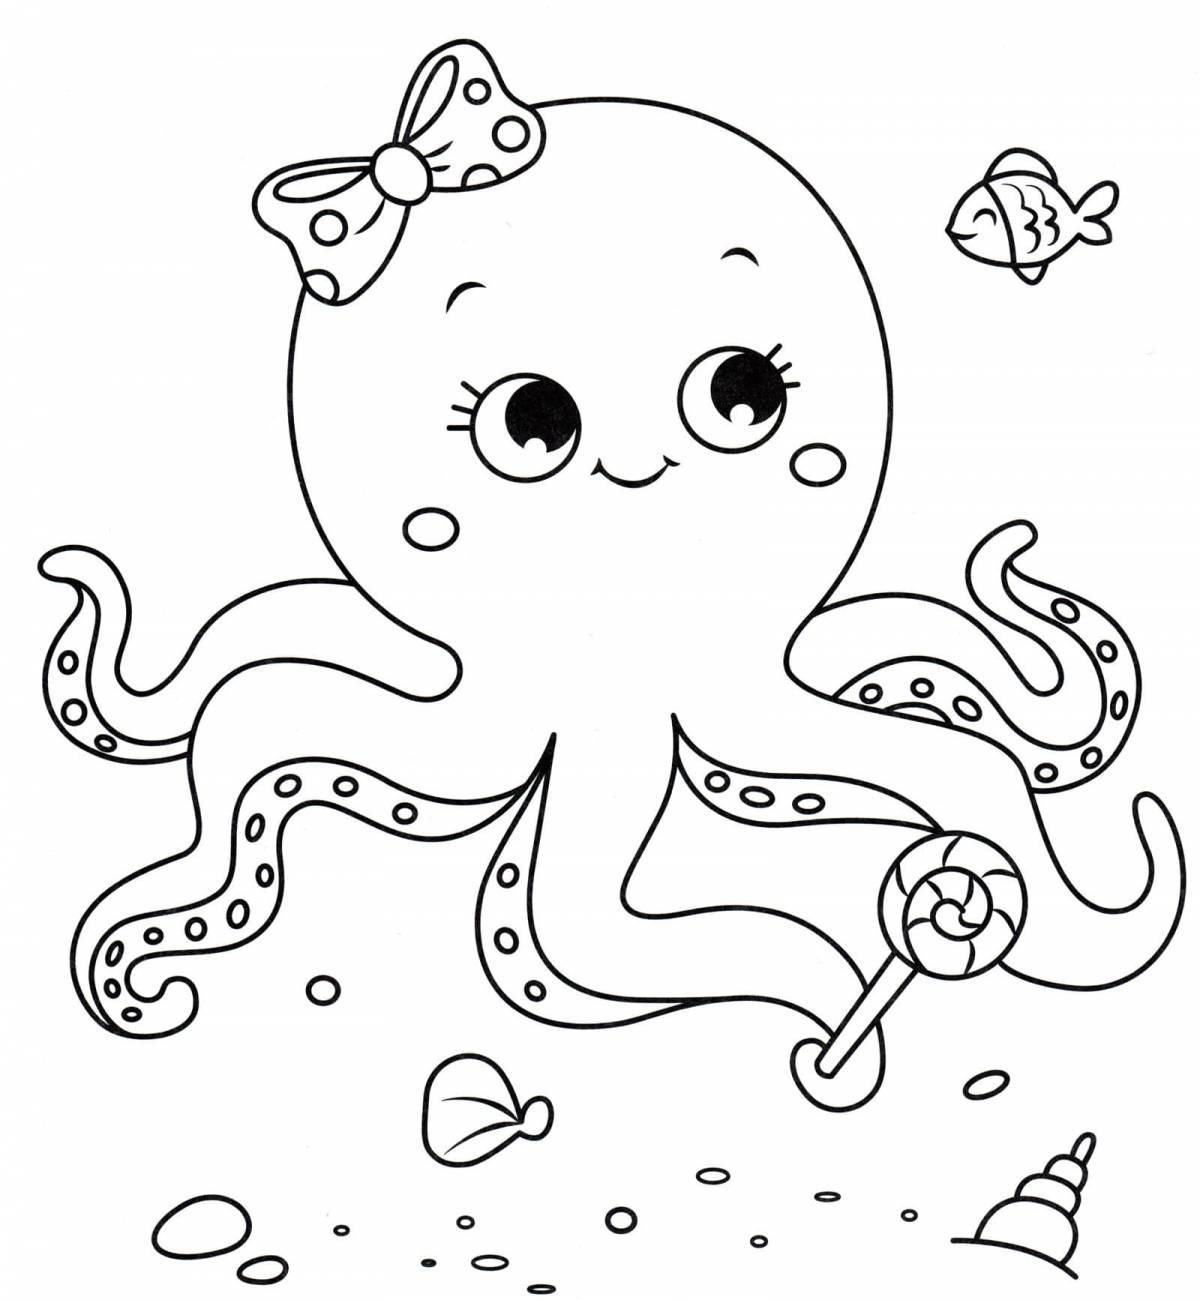 Exciting octopus coloring book for kids